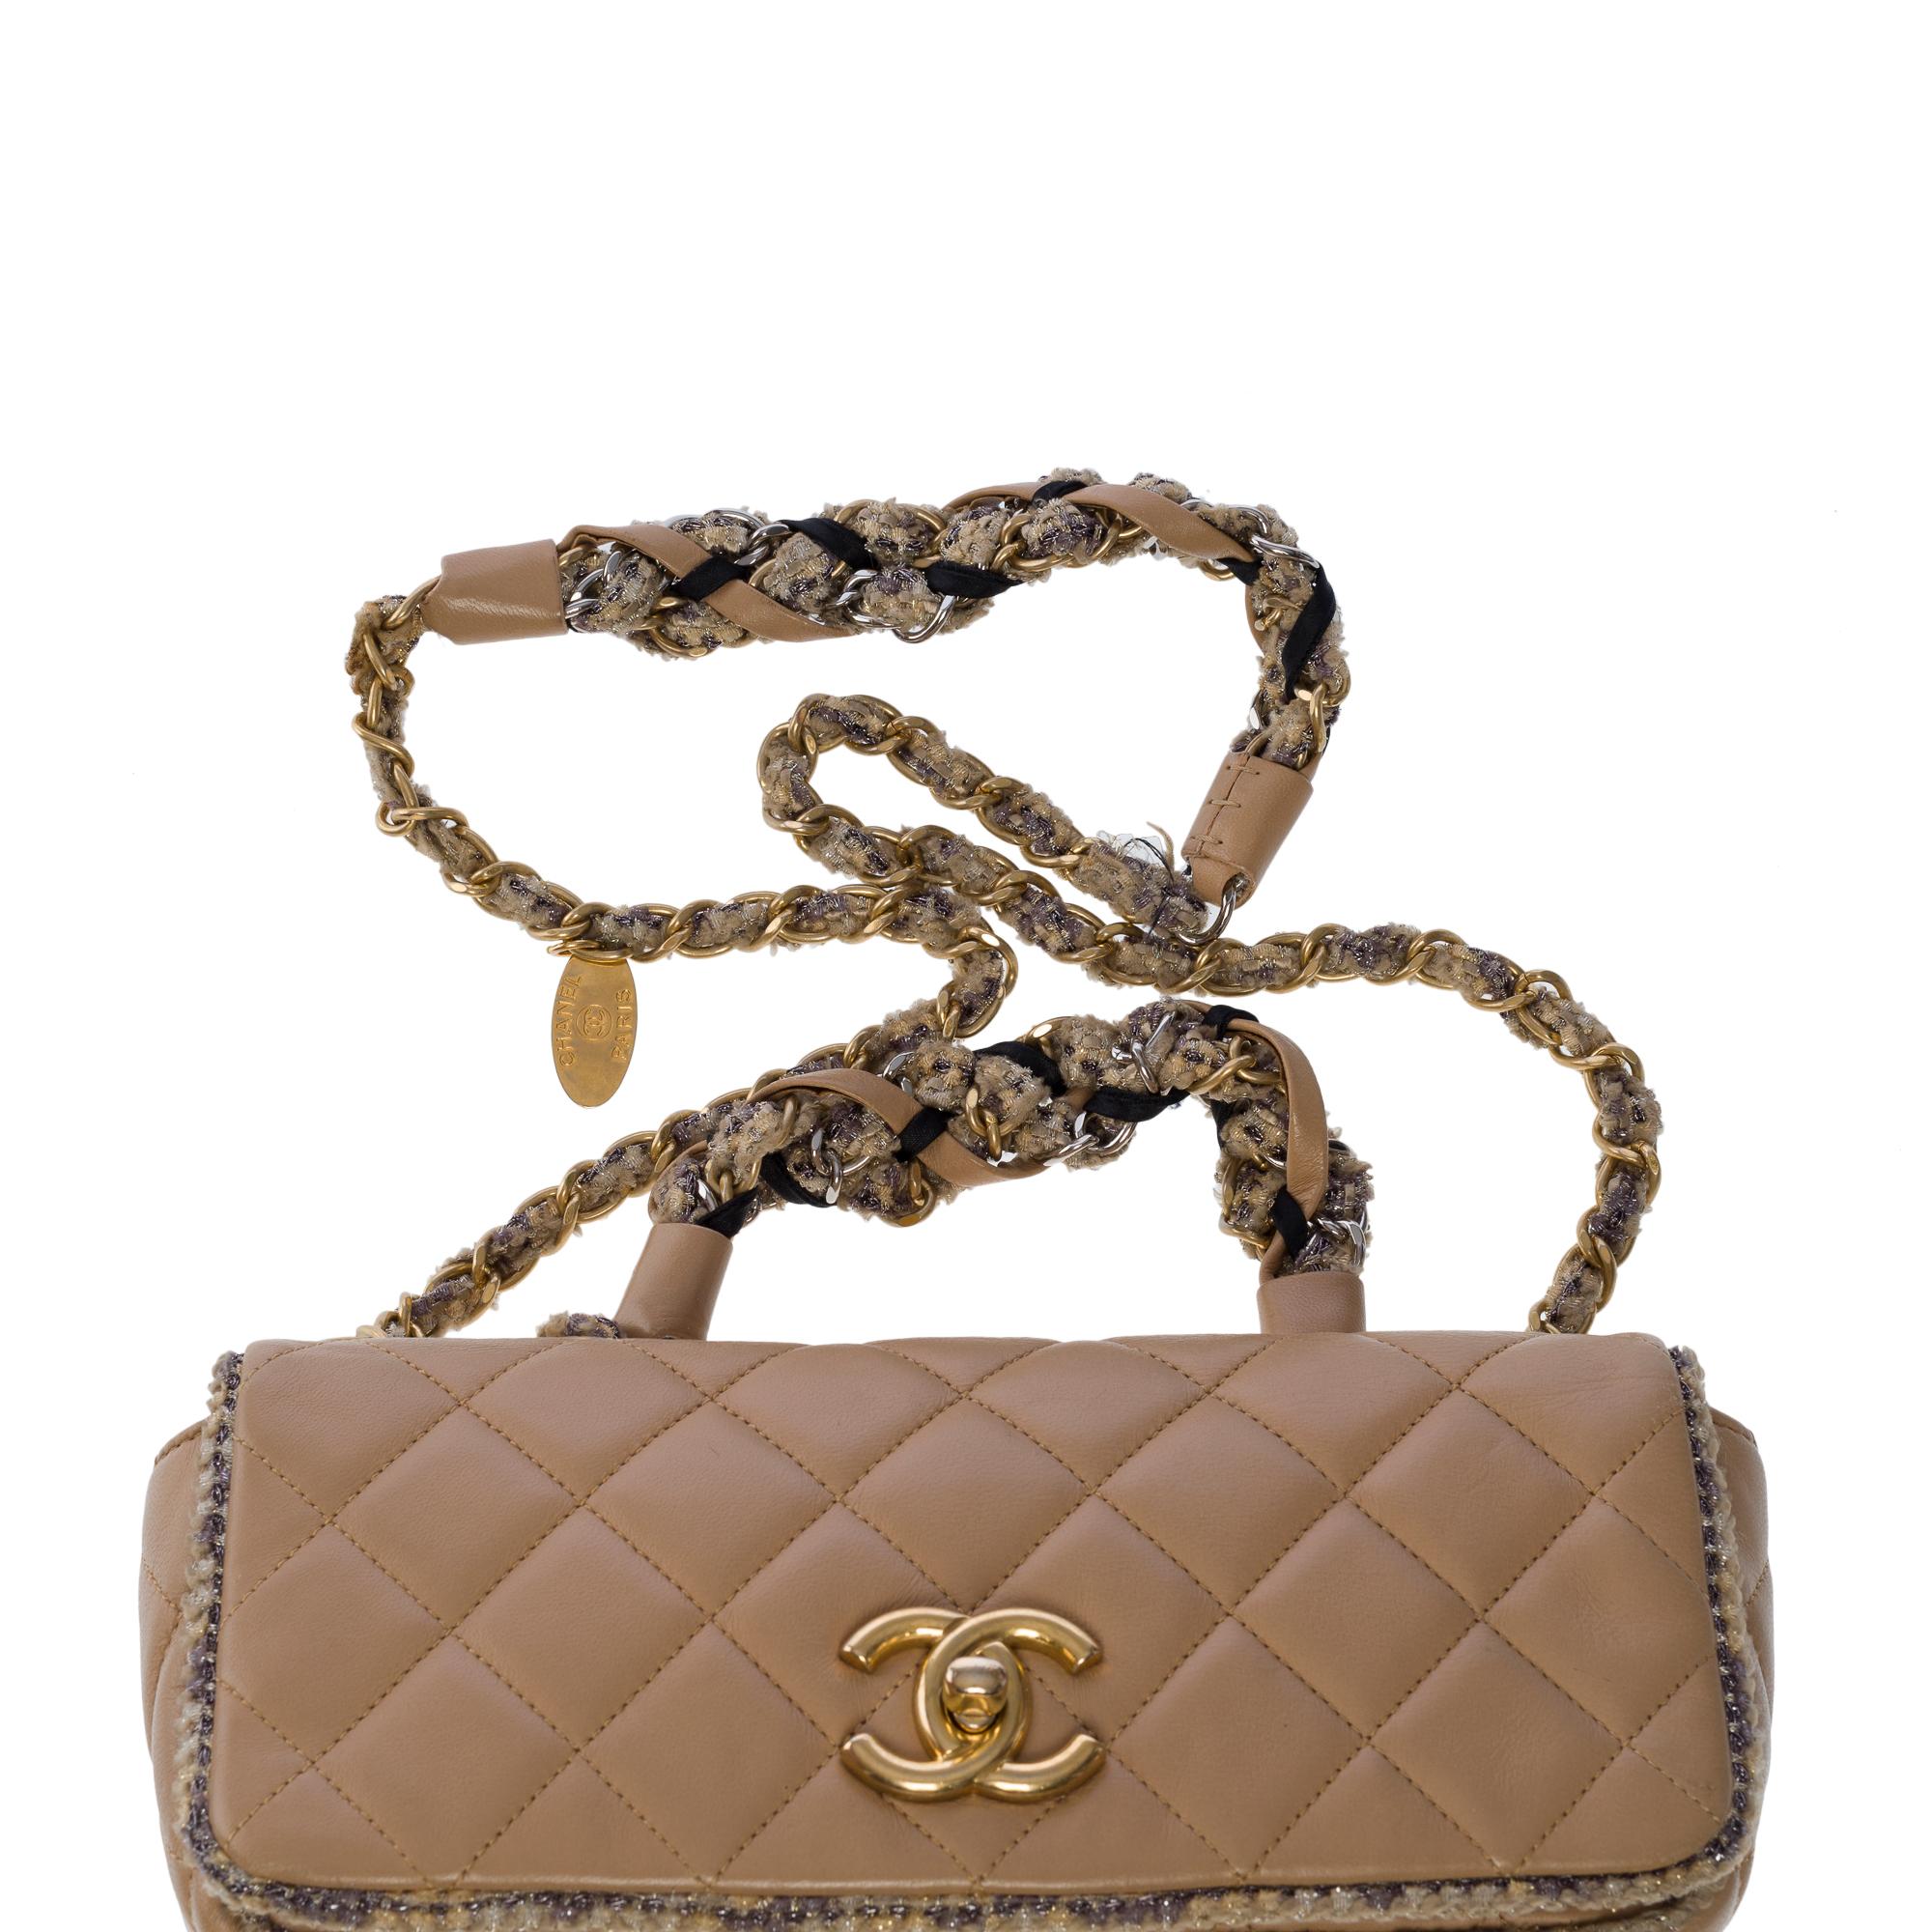 Rare limited edition Chanel Full flap shoulder bag in beige quilted lambskin, GHW For Sale 5